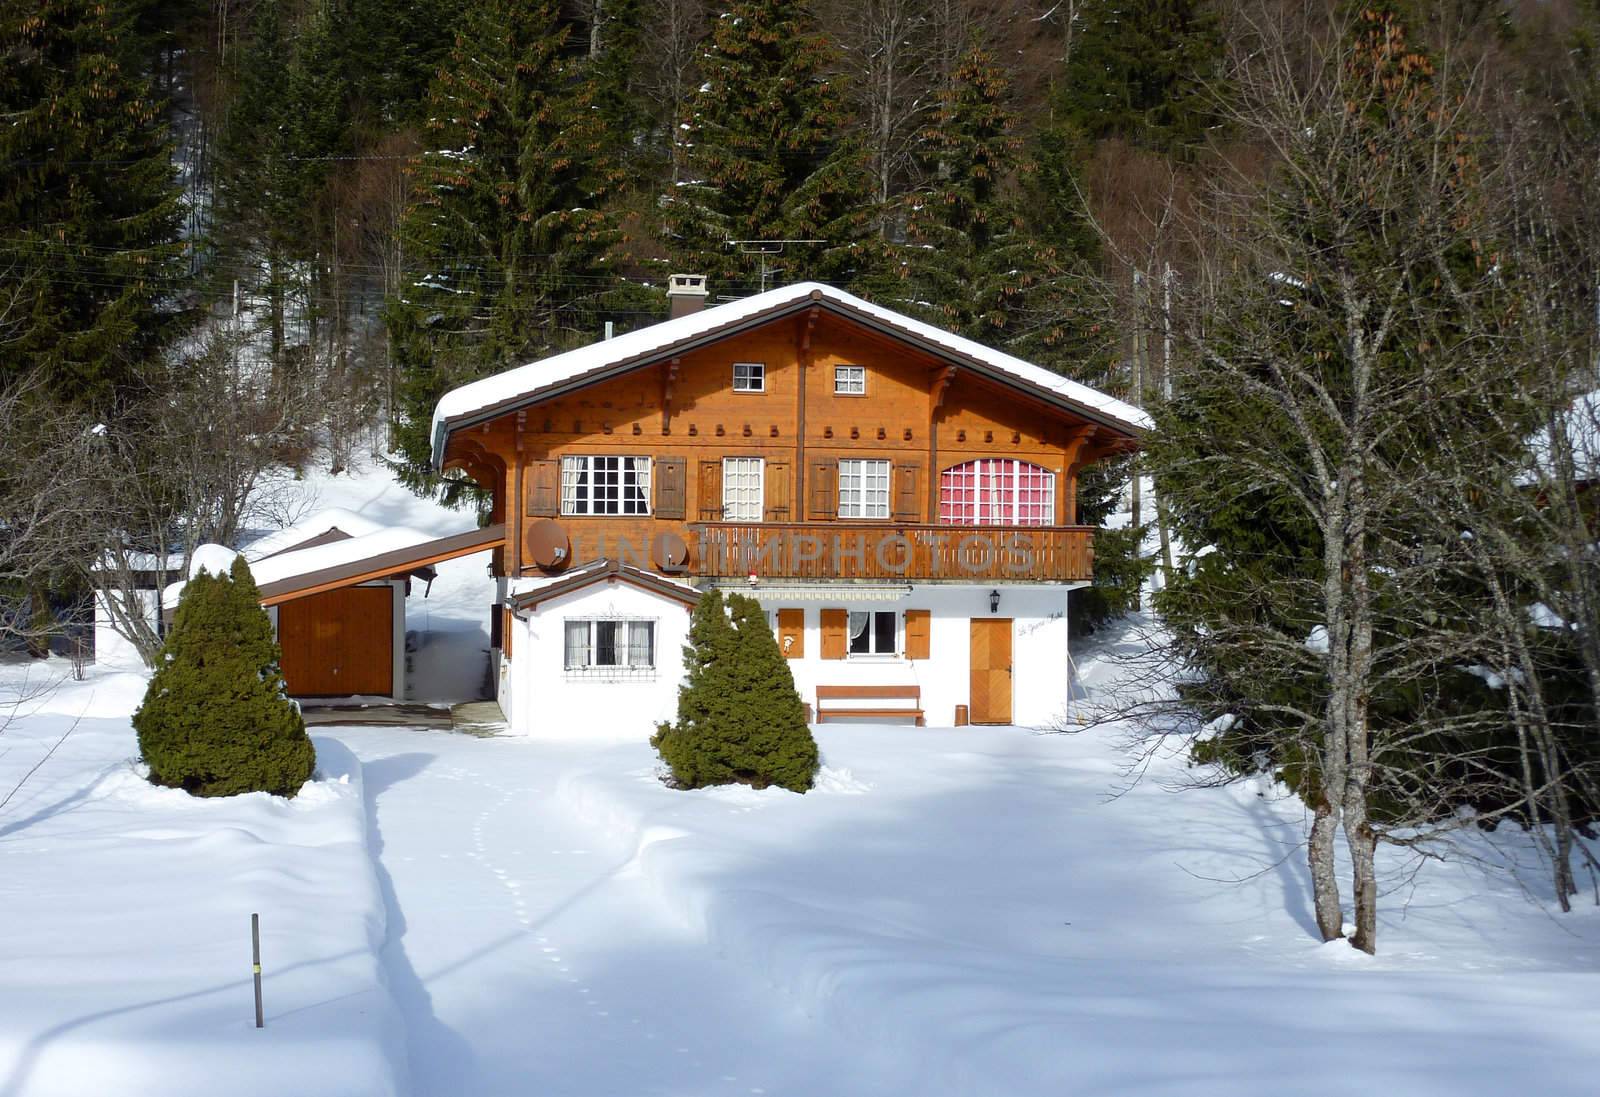 Chalet made of wood with forest of fir trees behind in Jura mountain Switzerland by winter